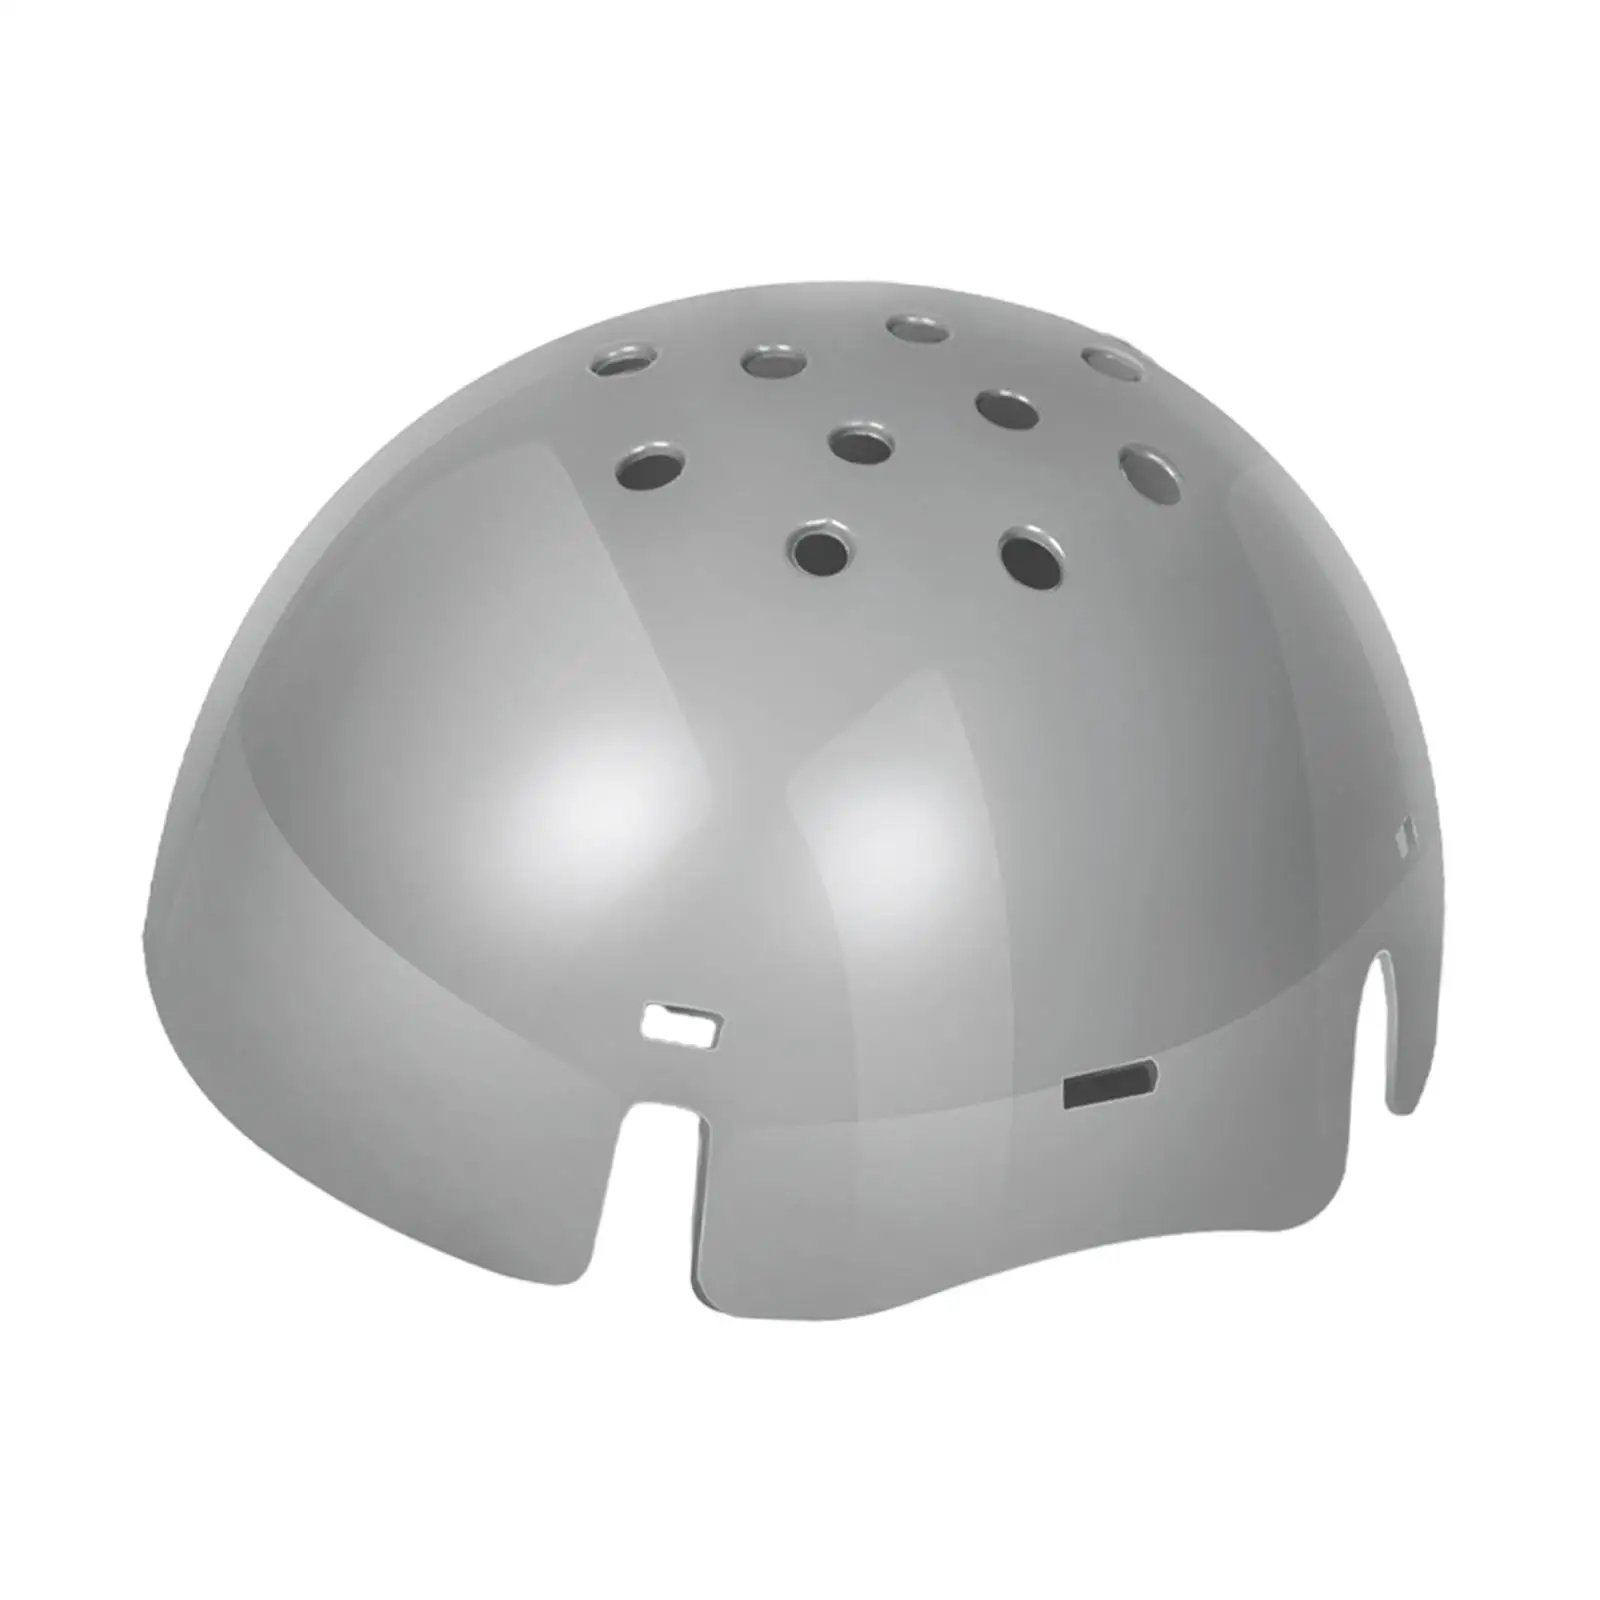 Crash Cap Liner Insert Shell Universal Collision Cap Lining Protective Impact Protection Hard Hat Reusable Sports Hat Liner